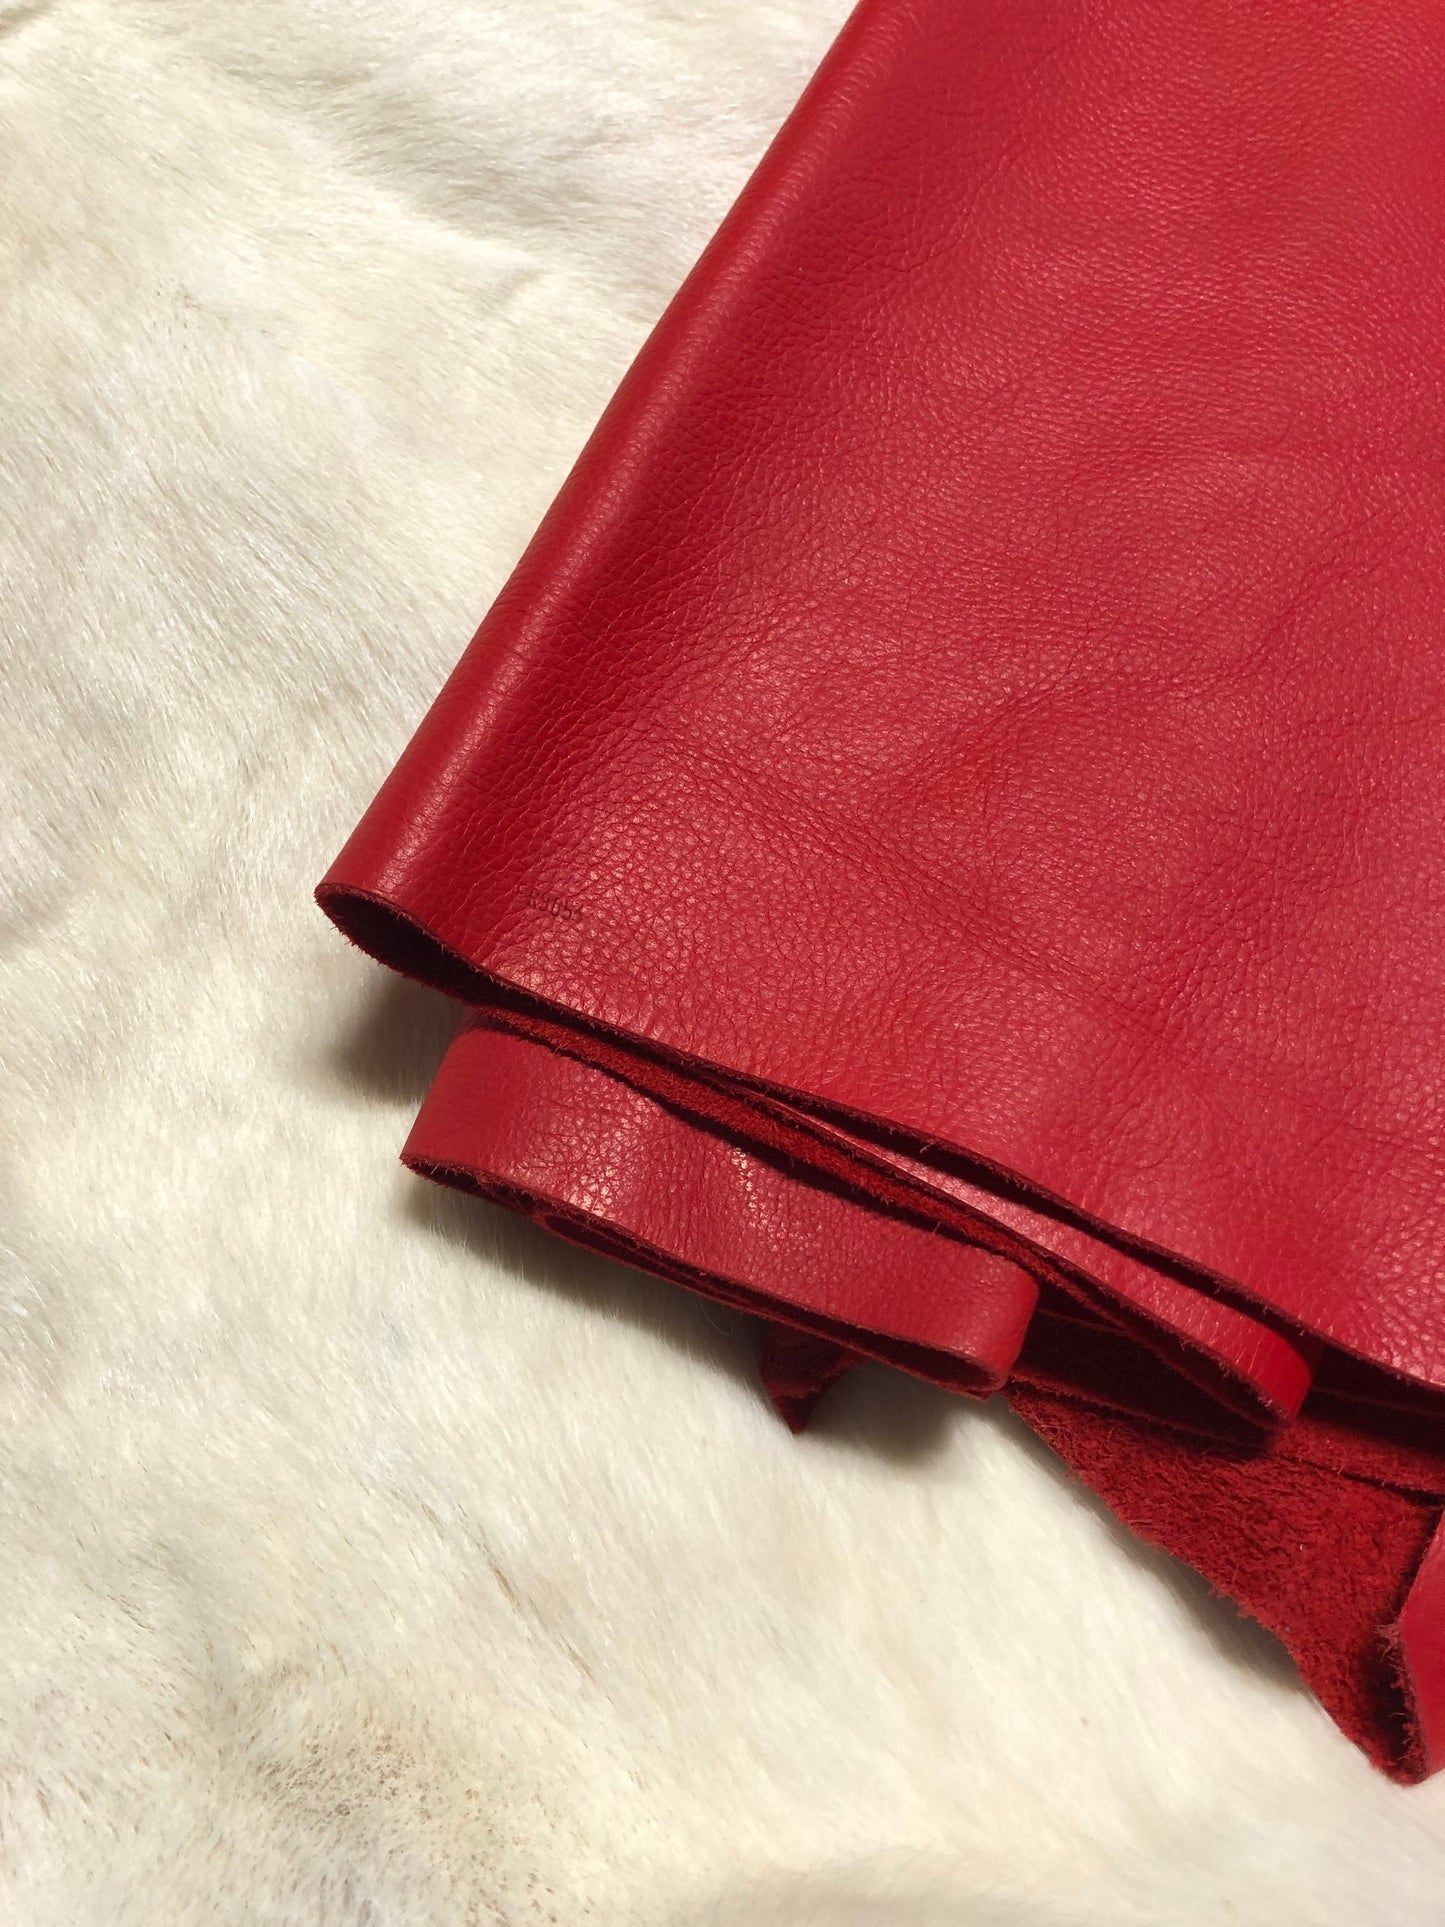 Red Pebbled Chrome tanned Designer leather - Raw Leather - Wholesale Leather 2-4oz